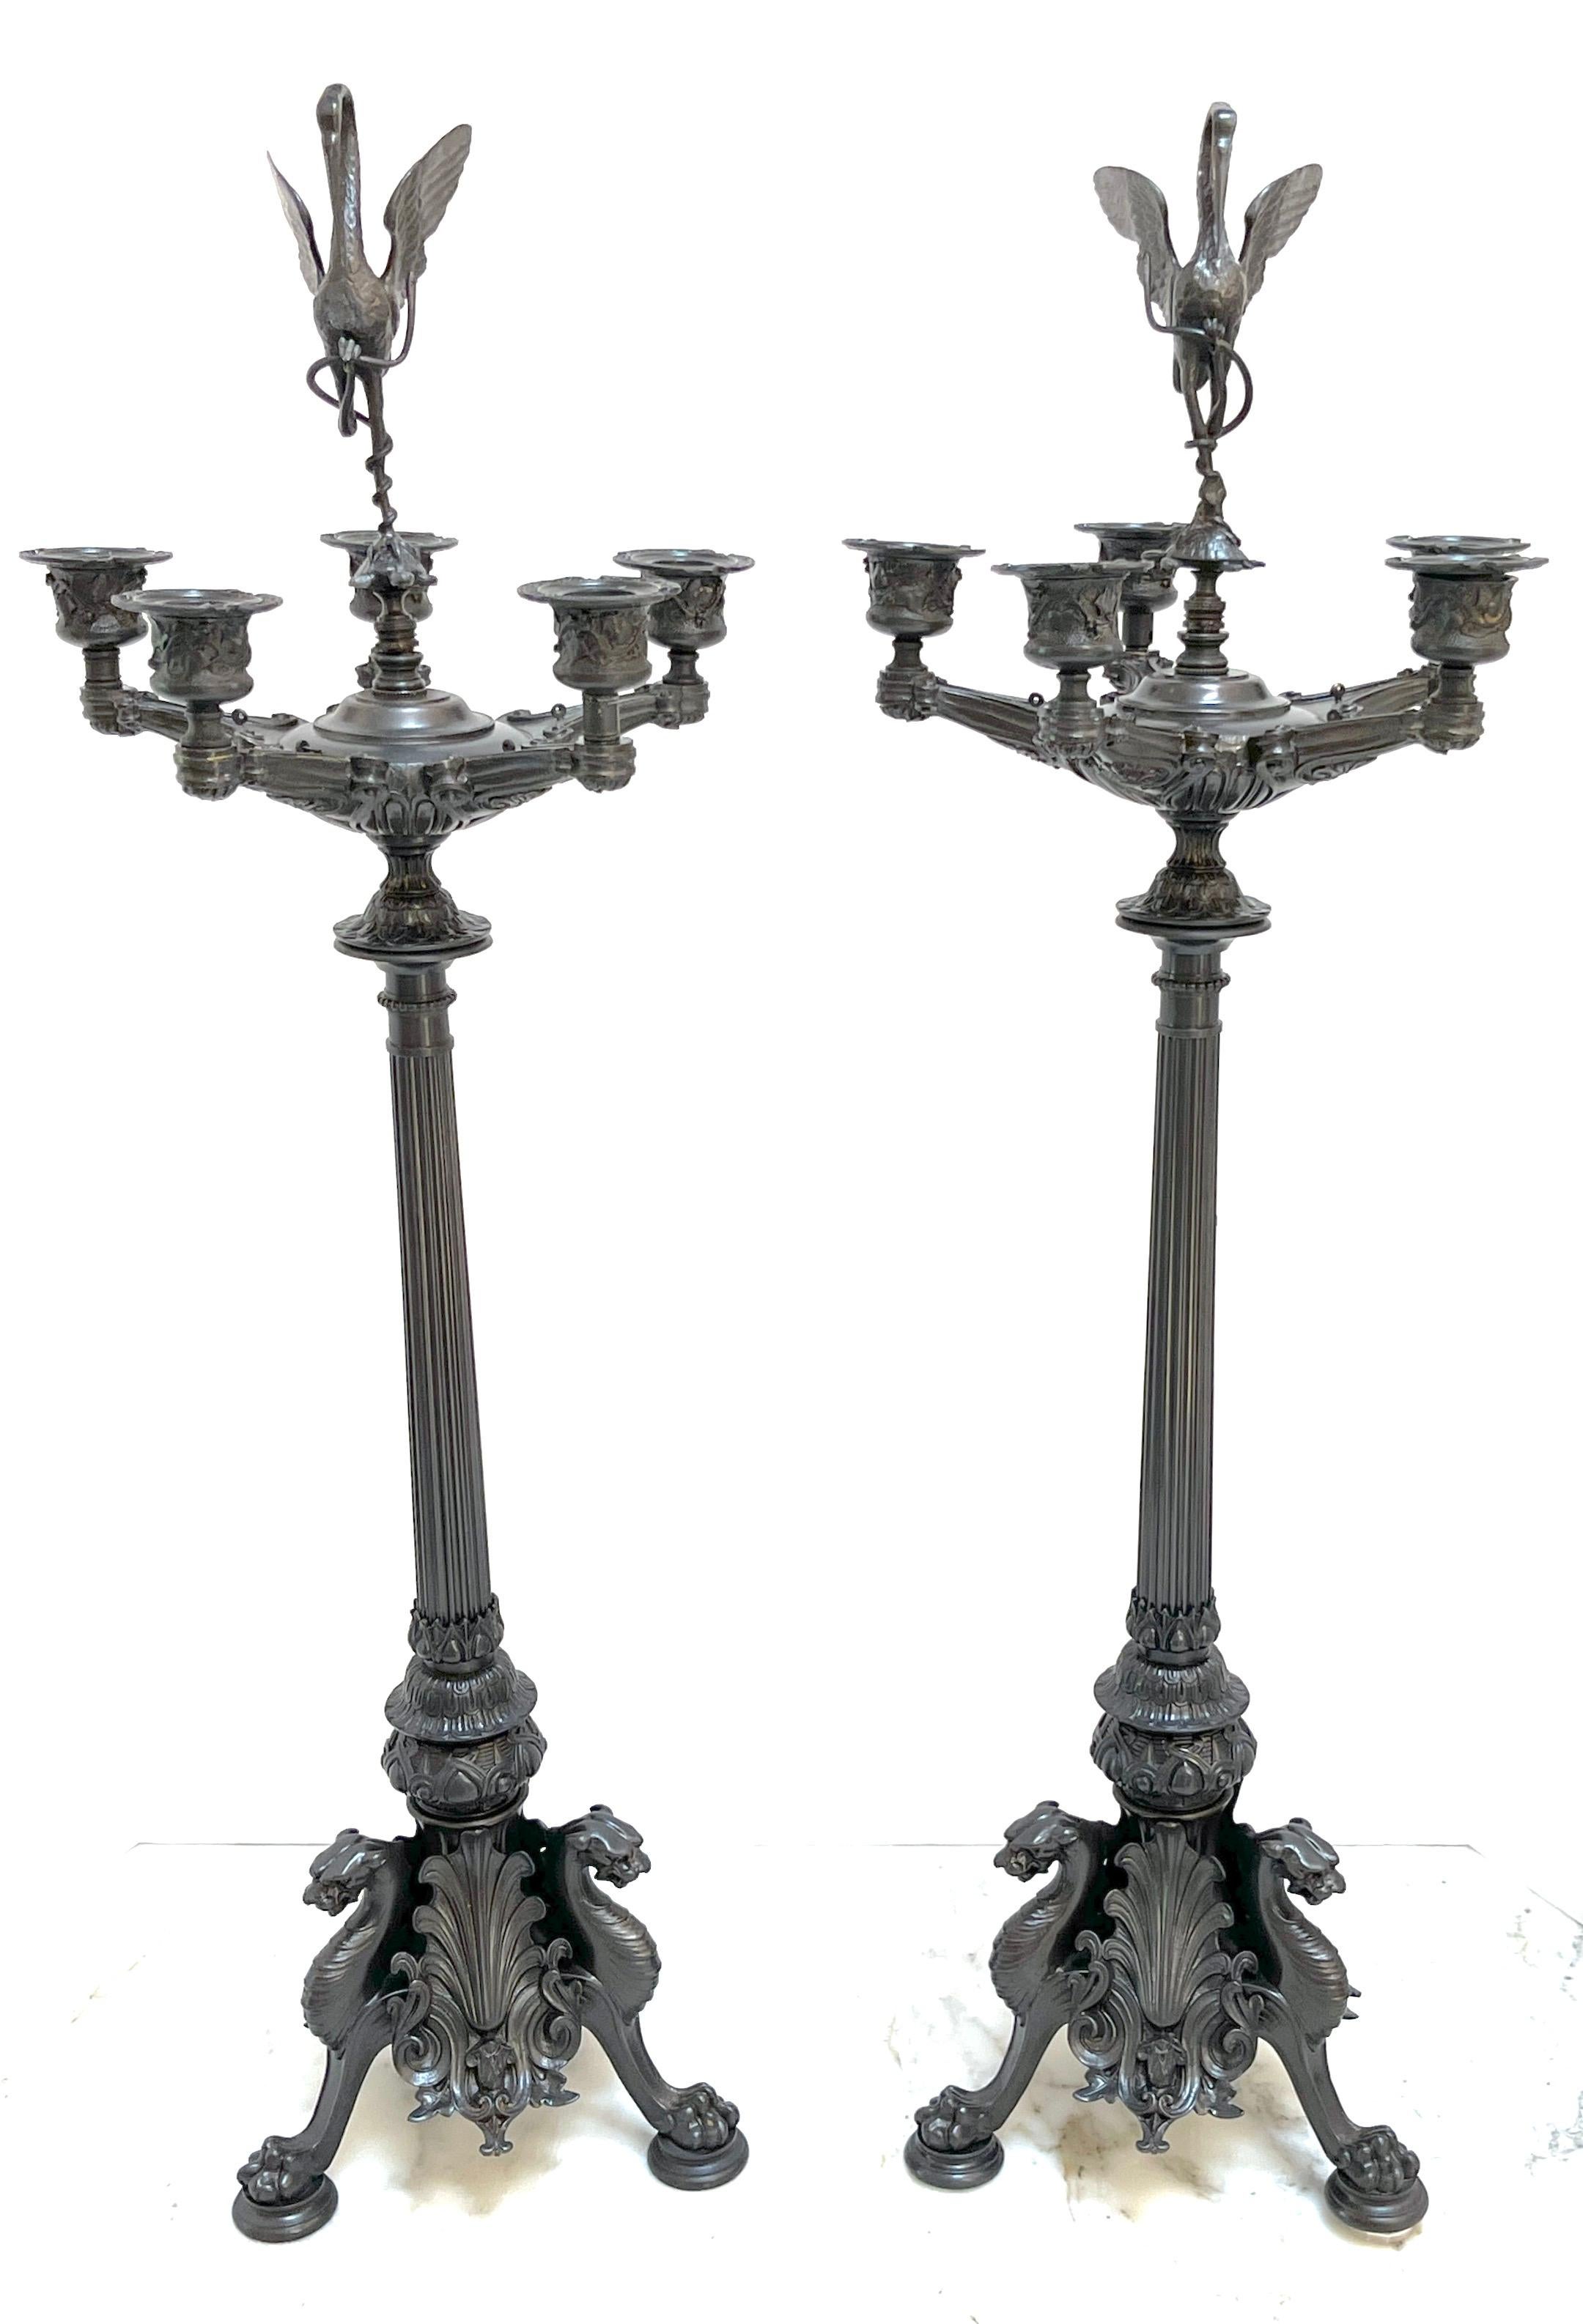 Pair of Napoleon III Patinated Bronze Patina 5-Light Candelabra
France Circa 1870s

A exquisite pair of Napoleon III patinated bronze candelabra, crafted in France during the 1870s. Standing at an impressive 30 inches tall, these candelabra are a